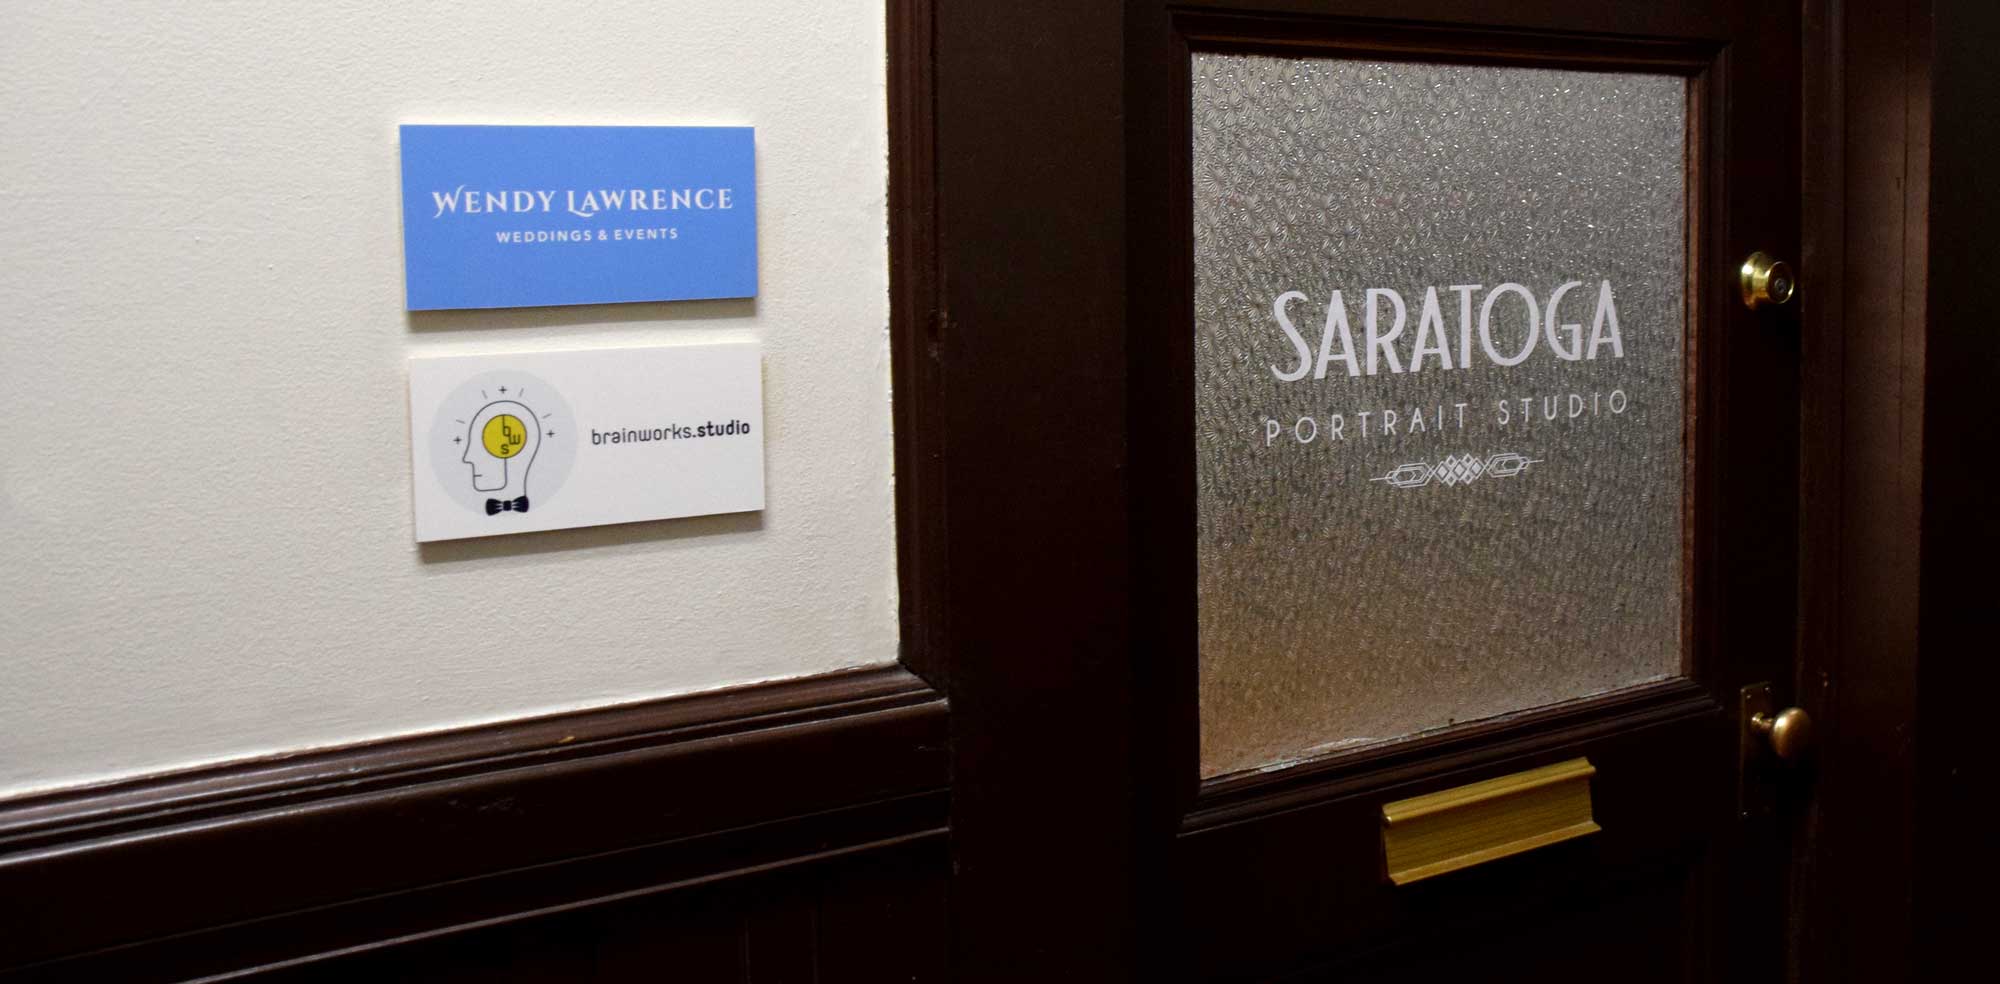 Photo of wall and glass door signage for Wendy Lawrence Weddings & Events, Brainworks Studio and Saratoga Portrait Studio.